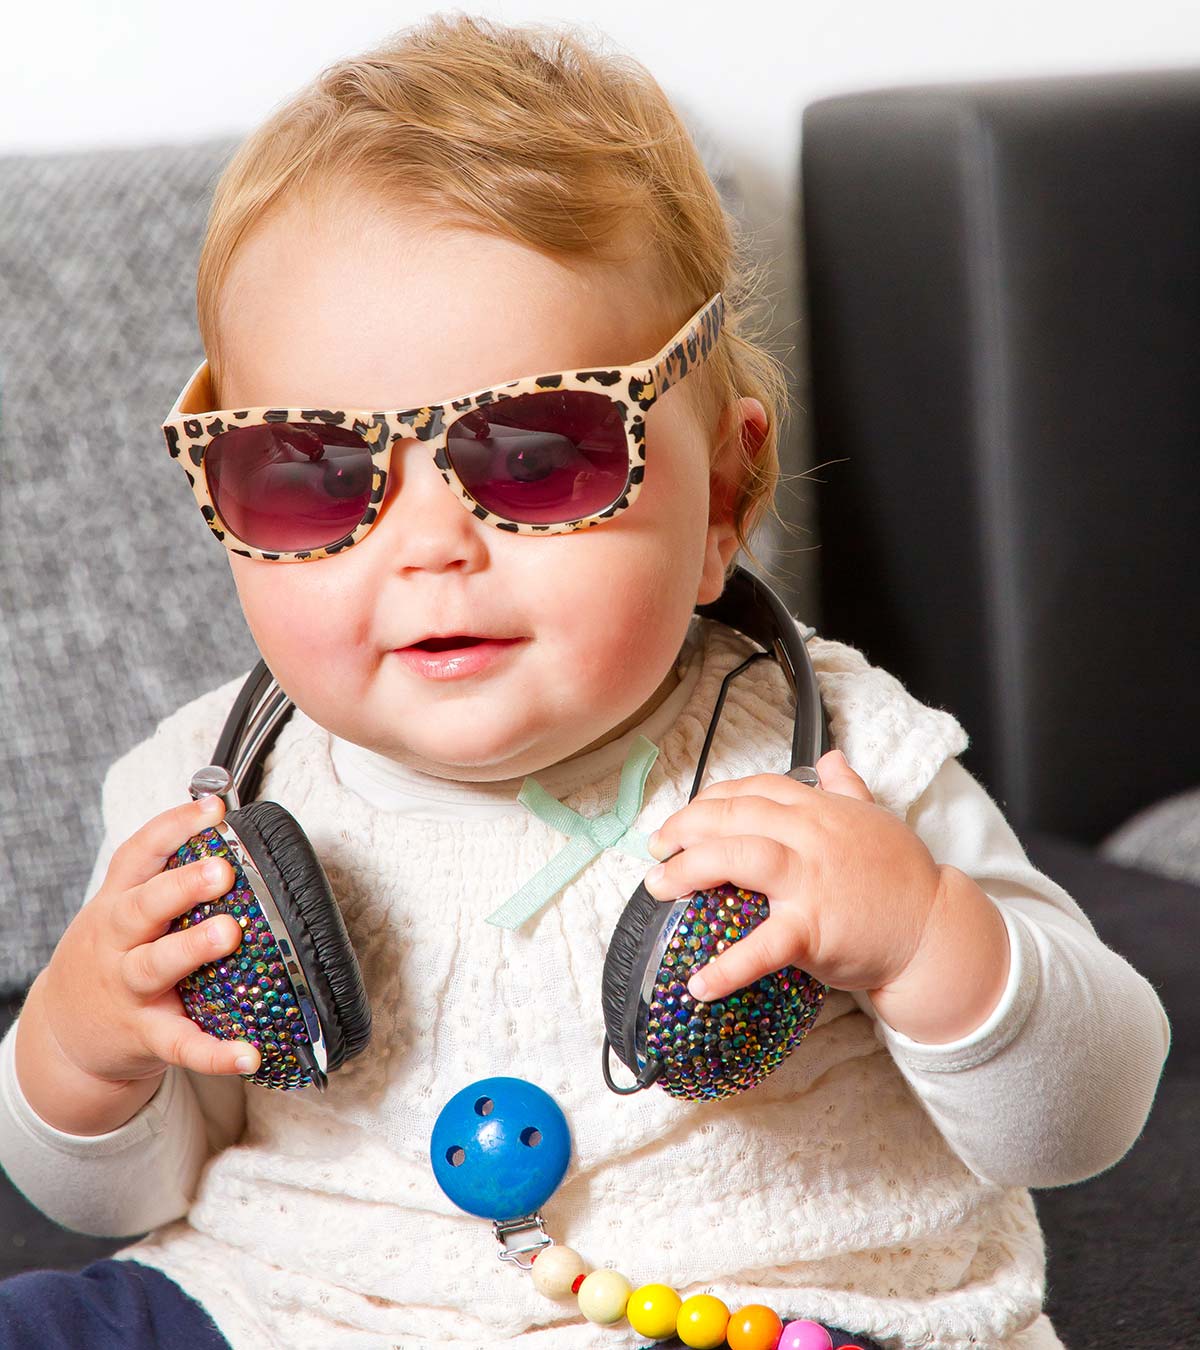 Top 20 Rockstar Names For Your Baby